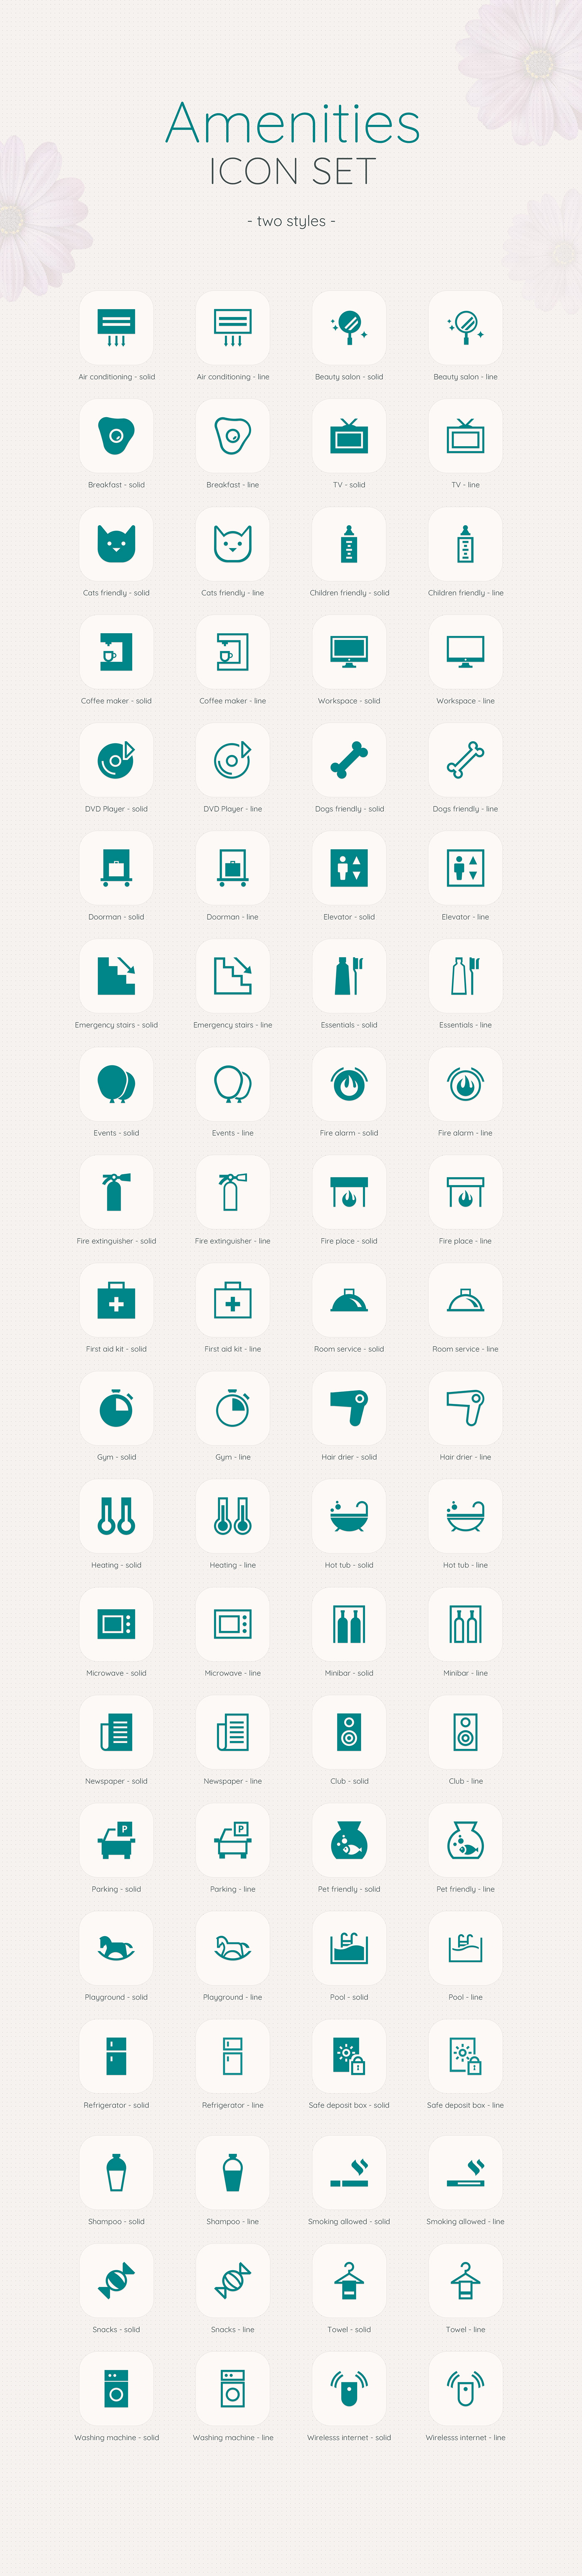 Icon amenities Facilities icons svg vectors visual design Web icon pack vector icons